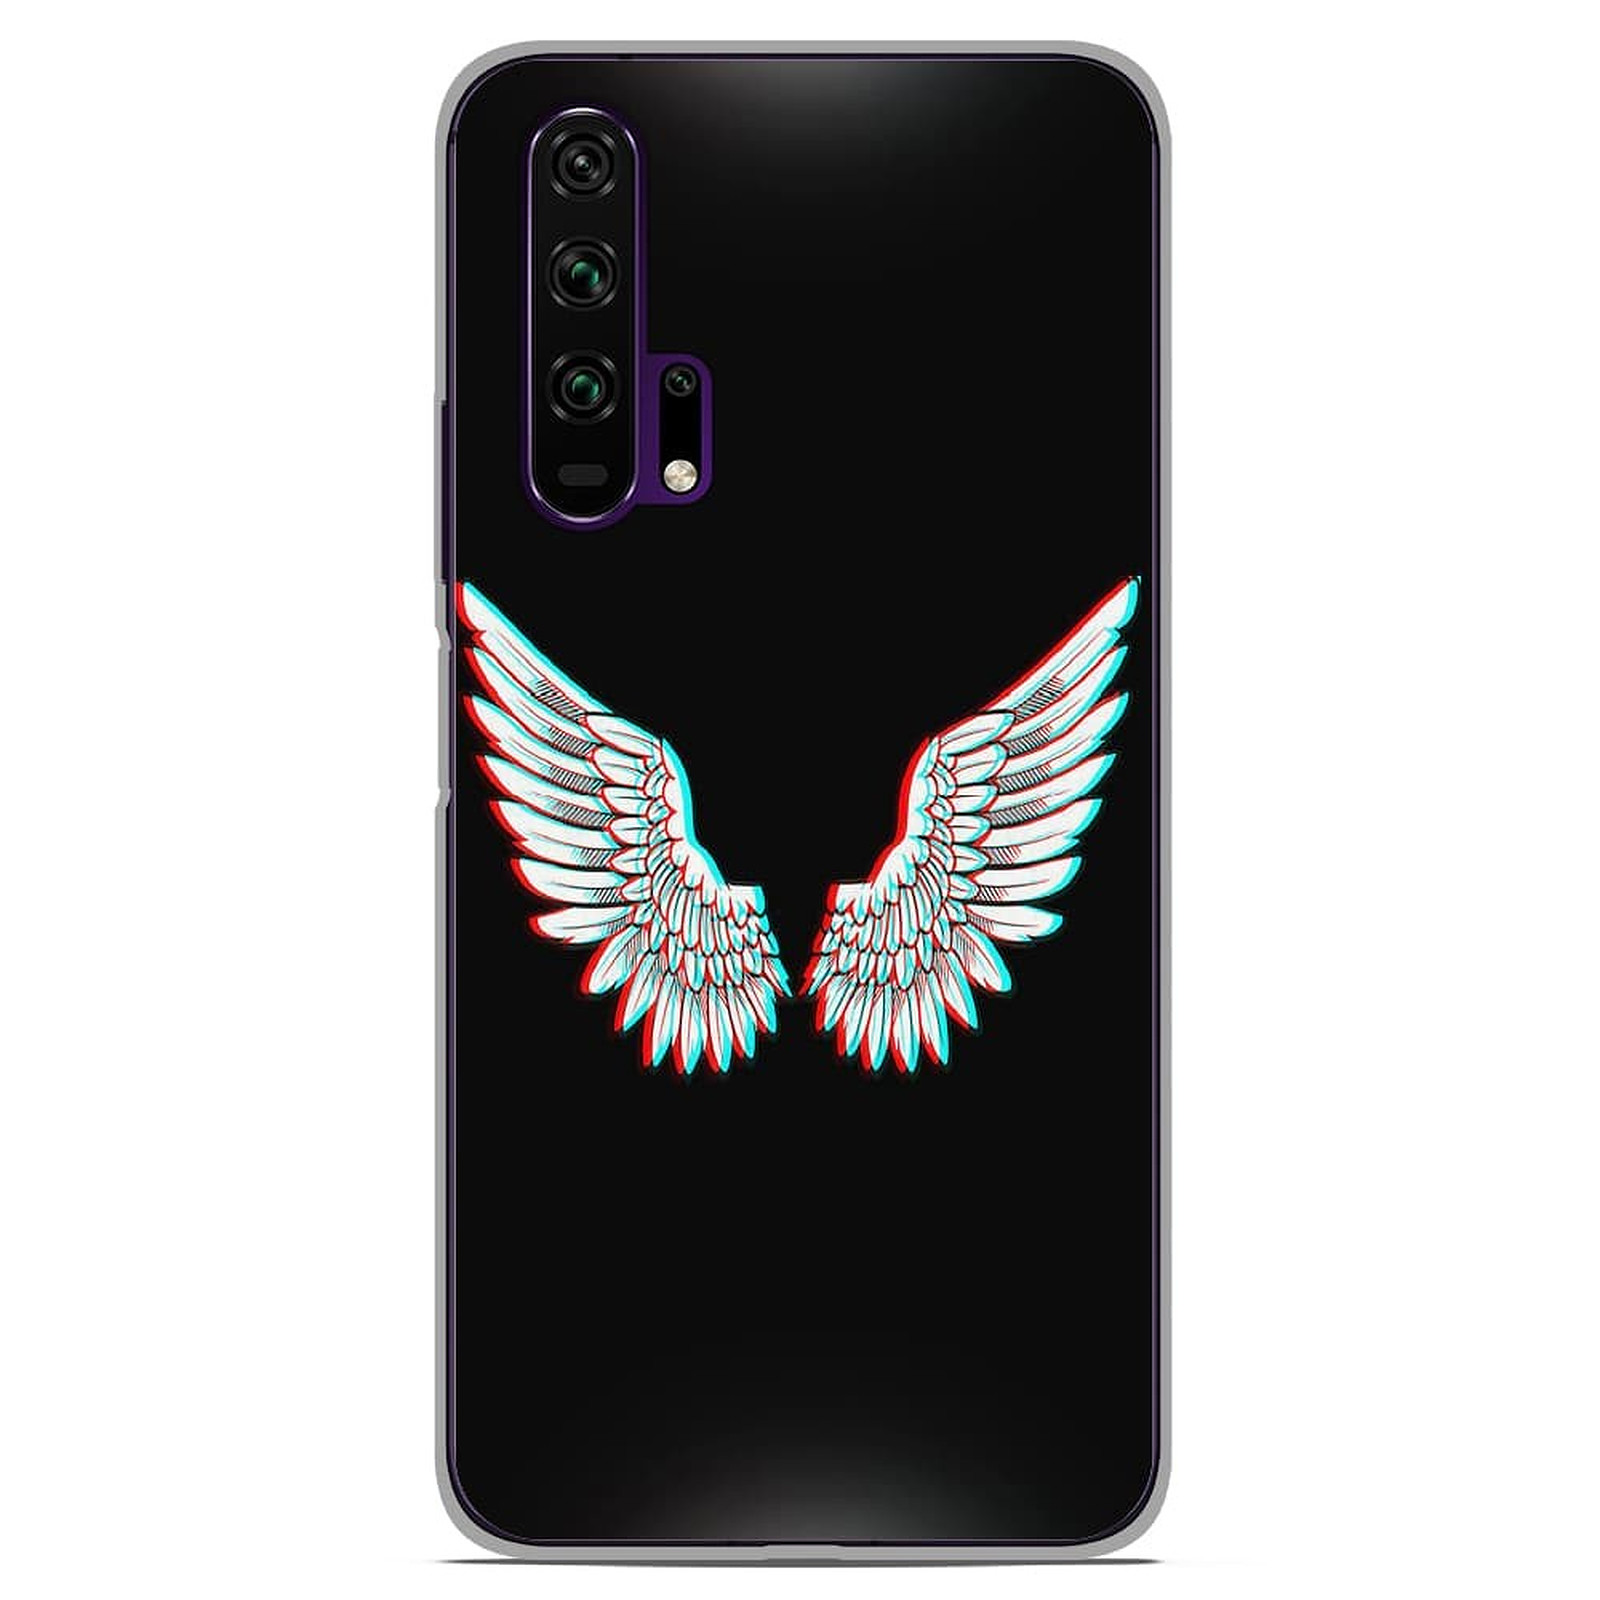 1001 Coques Coque silicone gel Huawei Honor 20 Pro motif Ailes d'Ange - Coque telephone 1001Coques